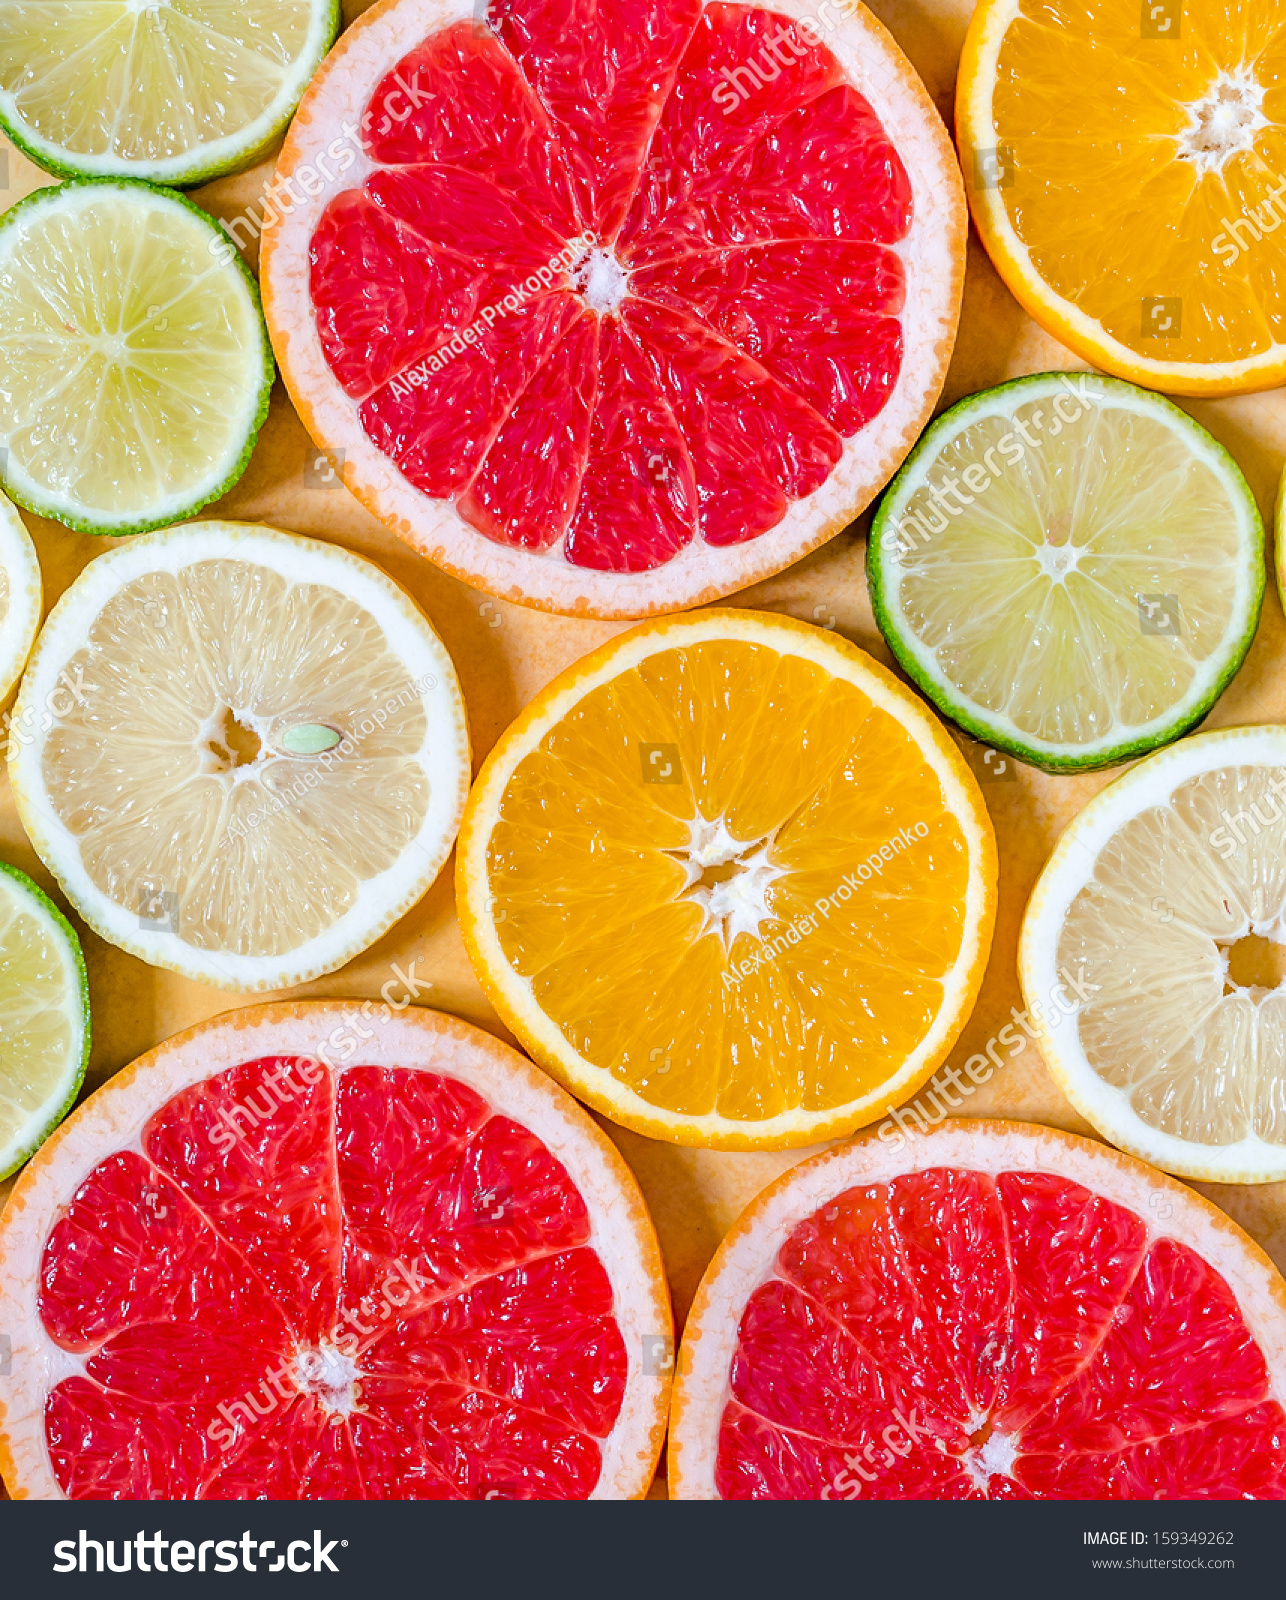 Slices of various citrus fruits #159349262